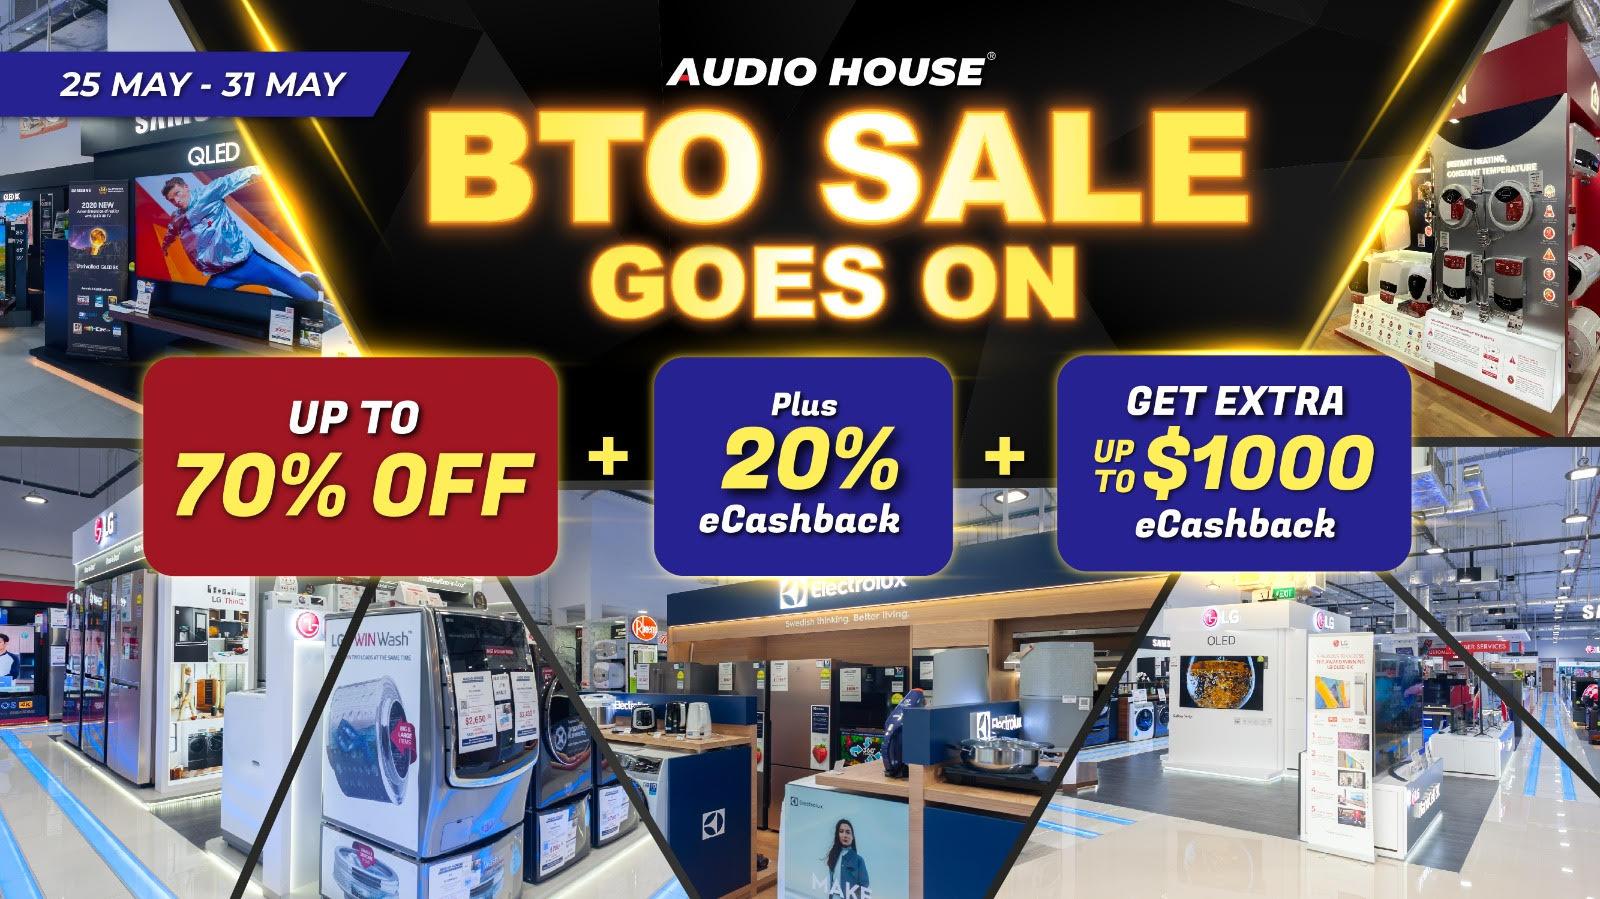 Audio House BTO Sale Goes On With Up to 70% OFF + 20% eCashback + EXTRA Up to $1,000 ECashback From Now to 31 May Only